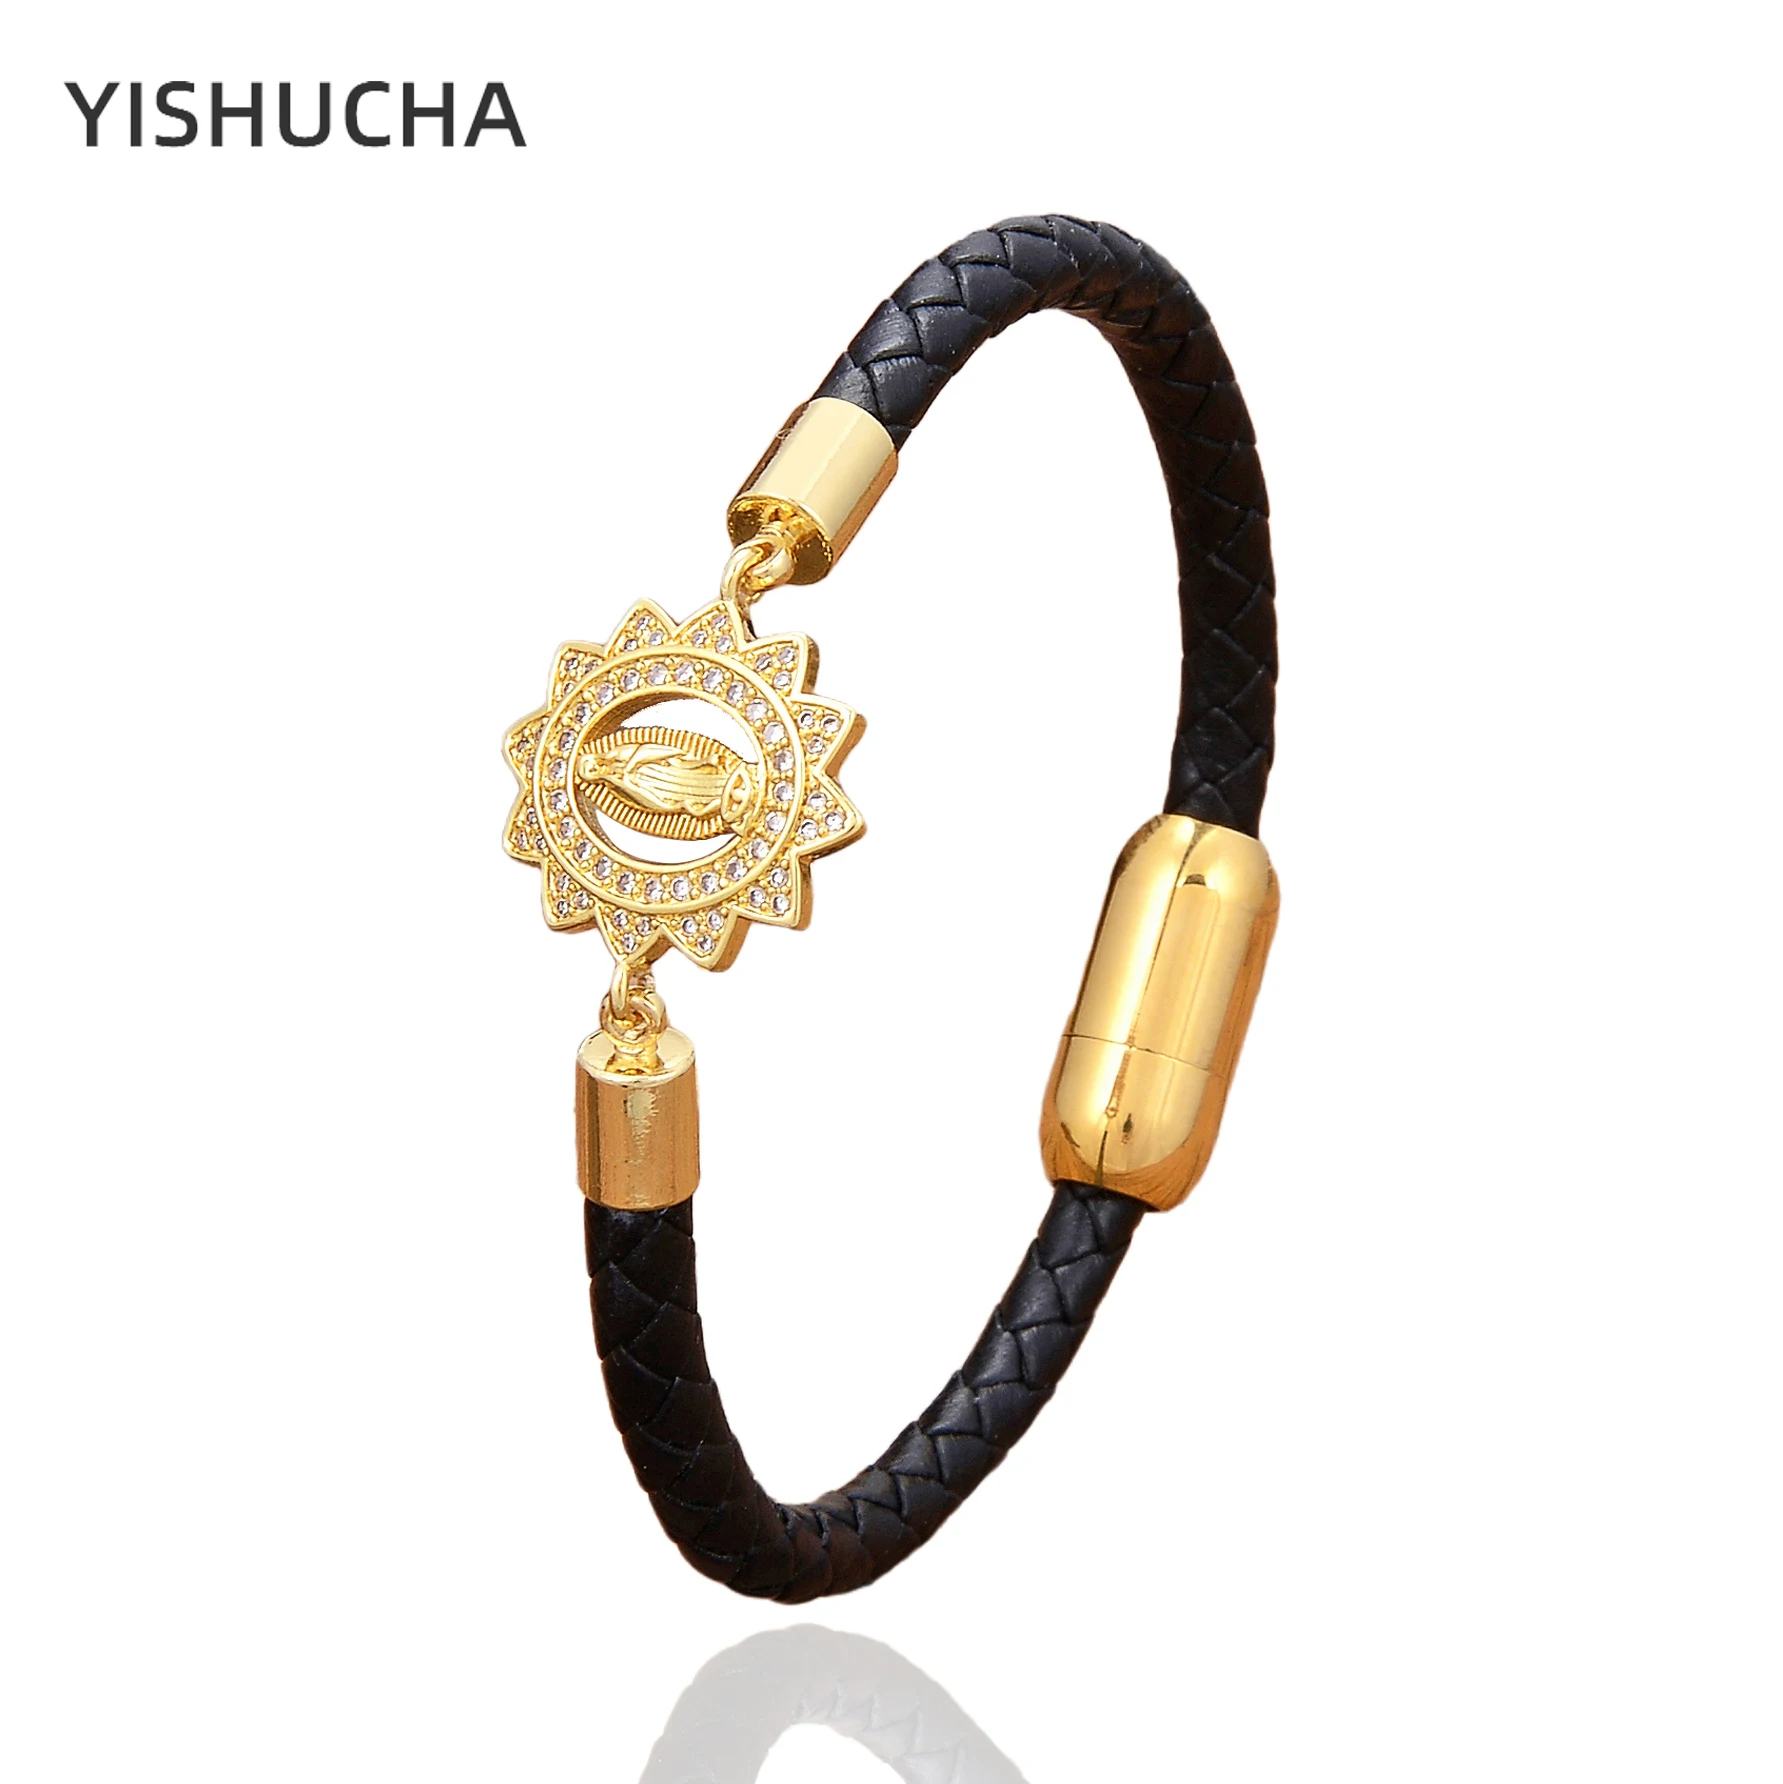 YISHUCHA 5 mm Leather Bracelets For Women Charm Vintage Virgin Mary Jesus Bracelet Stainless Steel Clasp Jewelry Wholesale Gifts